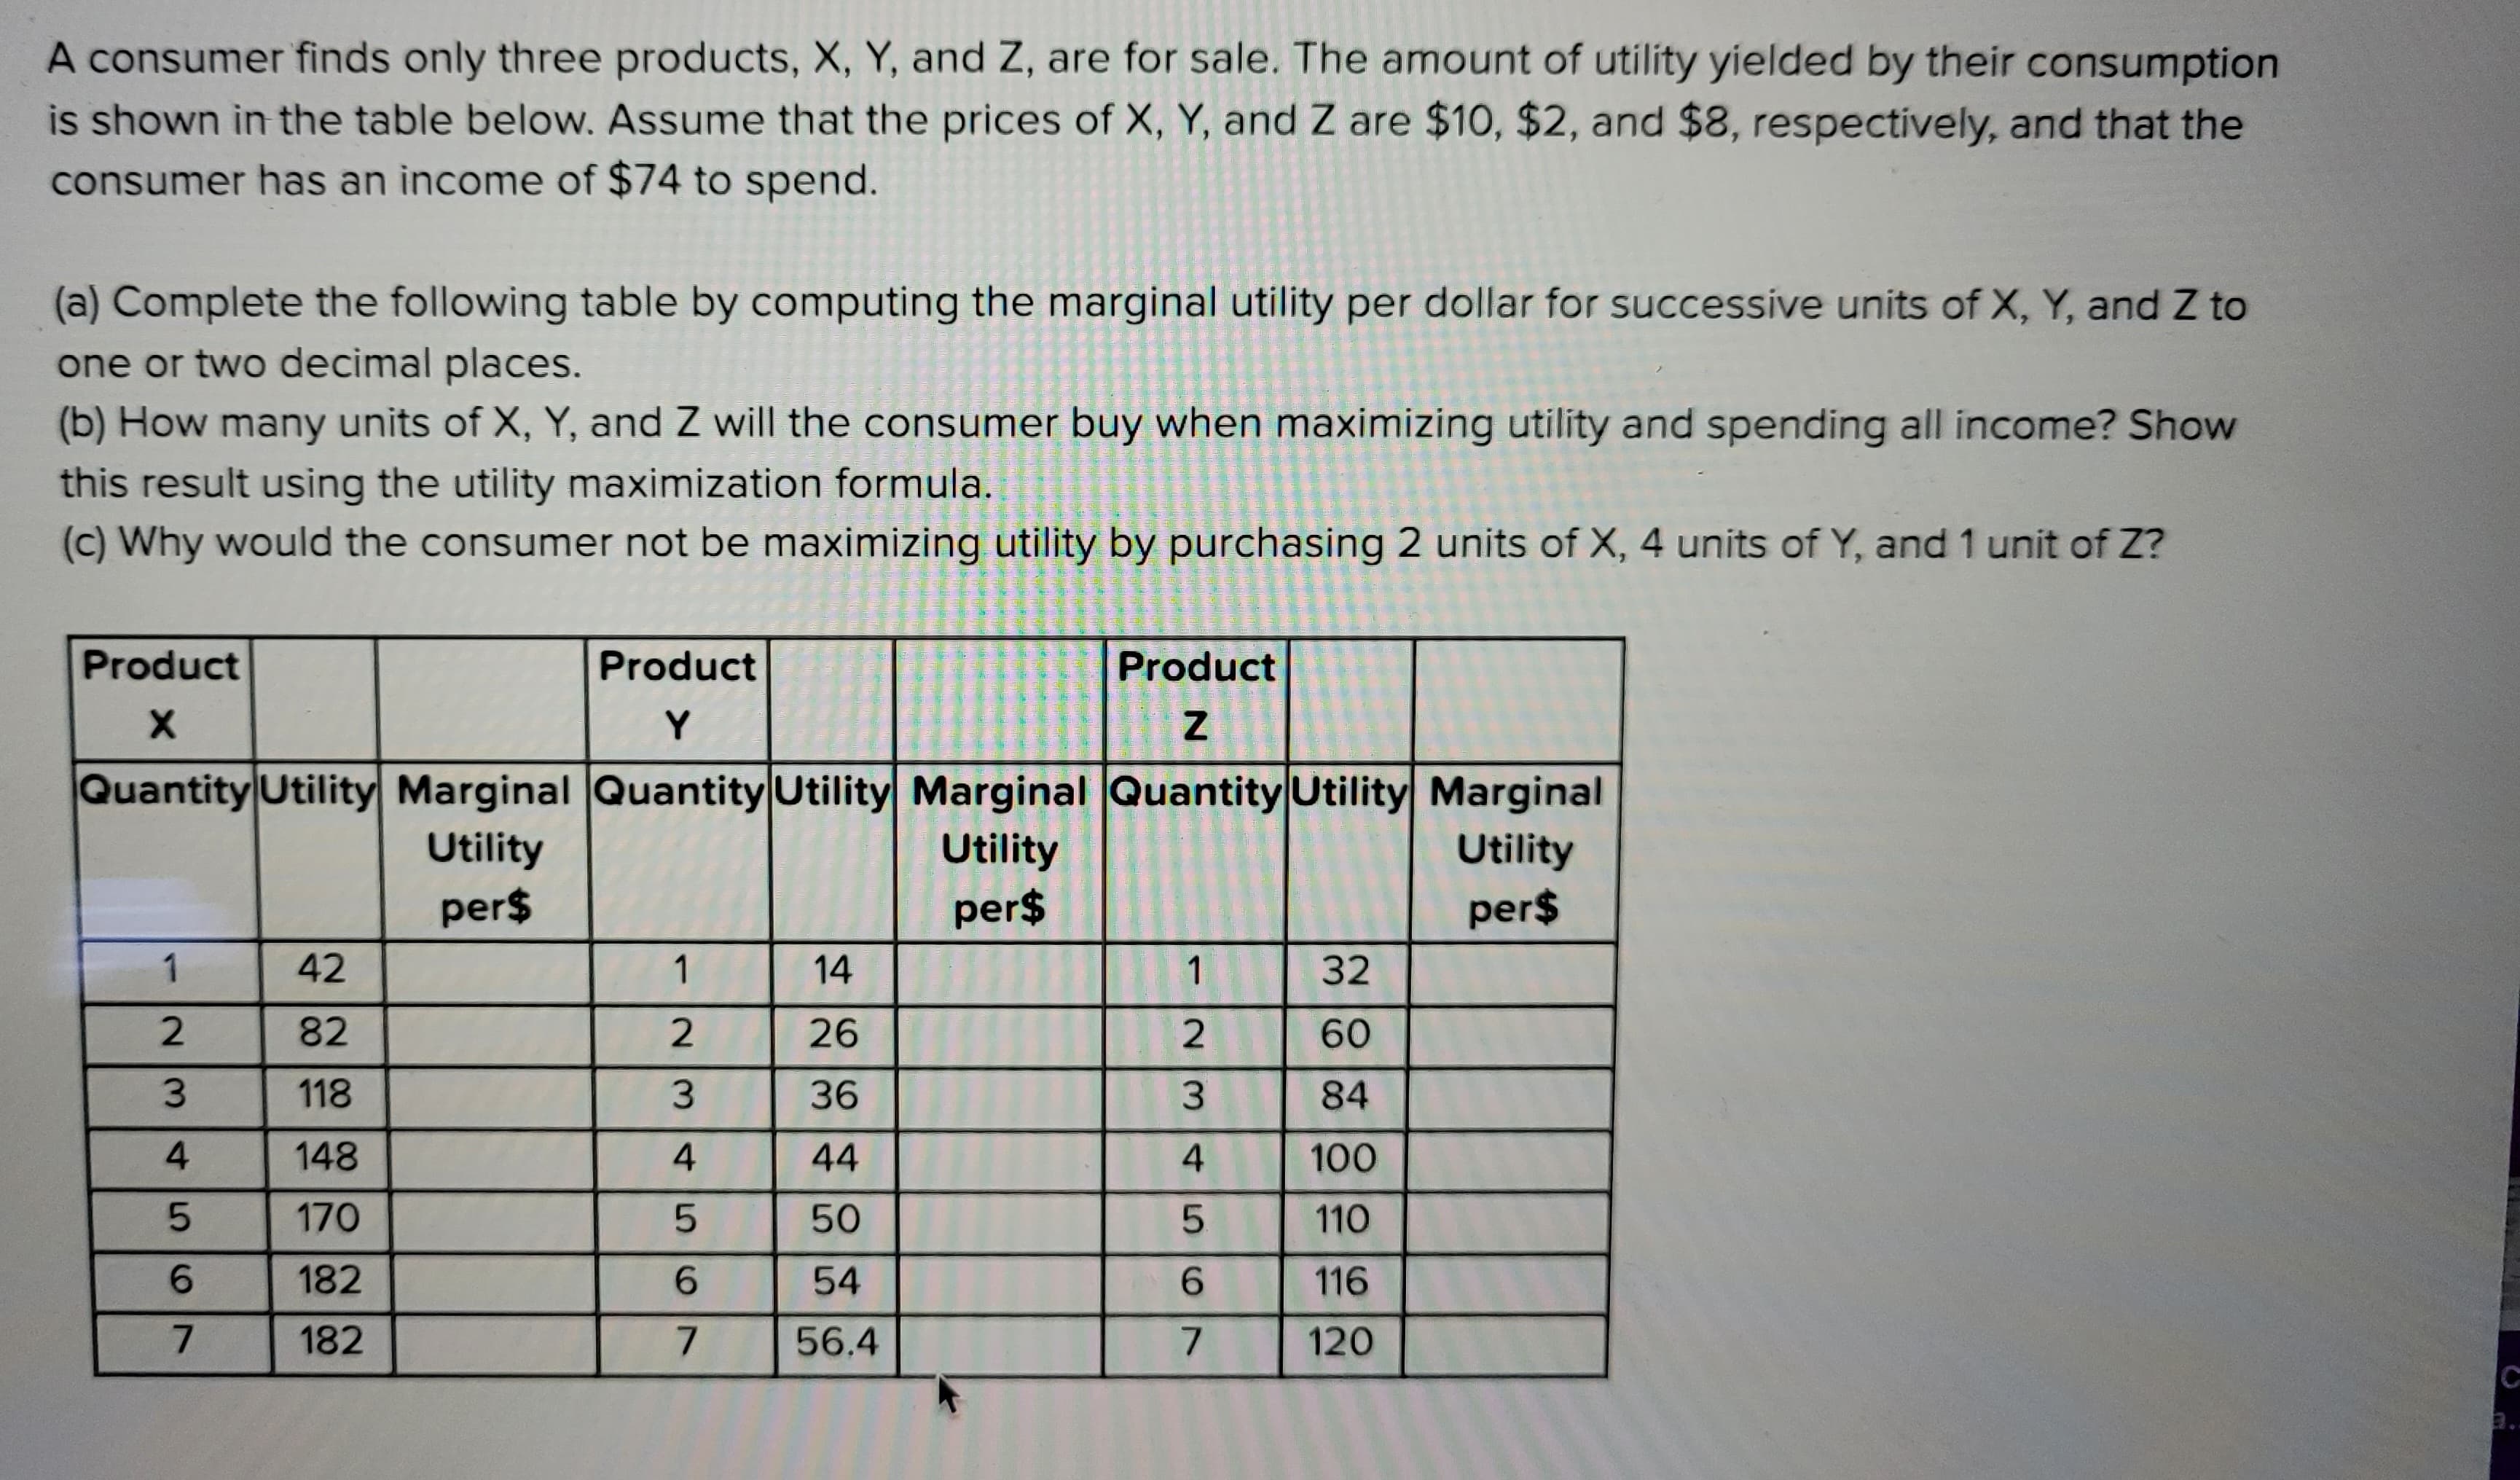 A consumer finds only three products, X, Y, and Z, are for sale. The amount of utility yielded by their consumption
is shown in the table below. Assume that the prices of X, Y, and Z are $10, $2, and $8, respectively, and that the
consumer has an income of $74 to spend.
(a) Complete the following table by computing the marginal utility per dollar for successive units of X, Y, and Z to
one or two decimal places.
(b) How many units of X, Y, and Z will the consumer buy when maximizing utility and spending all income? Show
this result using the utility maximization formula.
(c) Why would the consumer not be maximizing utility by purchasing 2 units of X, 4 units of Y, and 1 unit of Z?
Product
X
Product
Y
Quantity Utility Marginal Quantity Utility Marginal
Utility
Utility
per$
per$
1
23
4567
42
82
118
148
170
182
182
1
23
4
5
6
7
14
26
36
44
50
54
56.4
Product
Z
Quantity Utility Marginal
Utility
per$
1
23456
7
32
60
84
100
110
116
120
3..